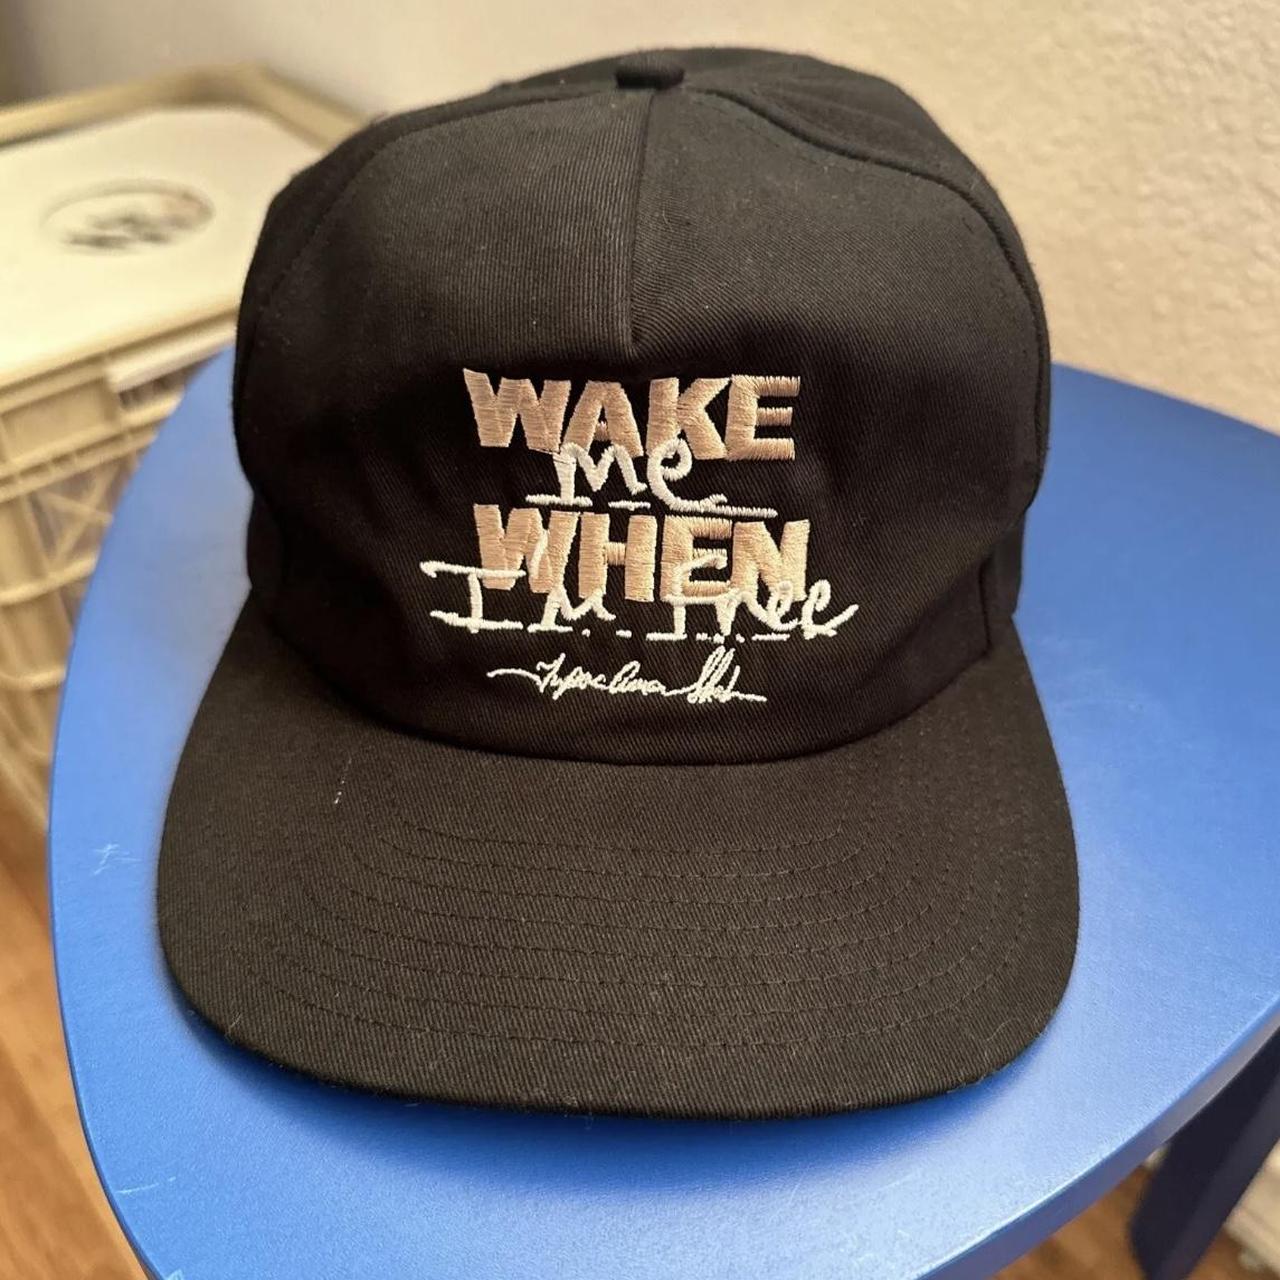 Vintage 2pac Tupac SnapBack. Great condition...